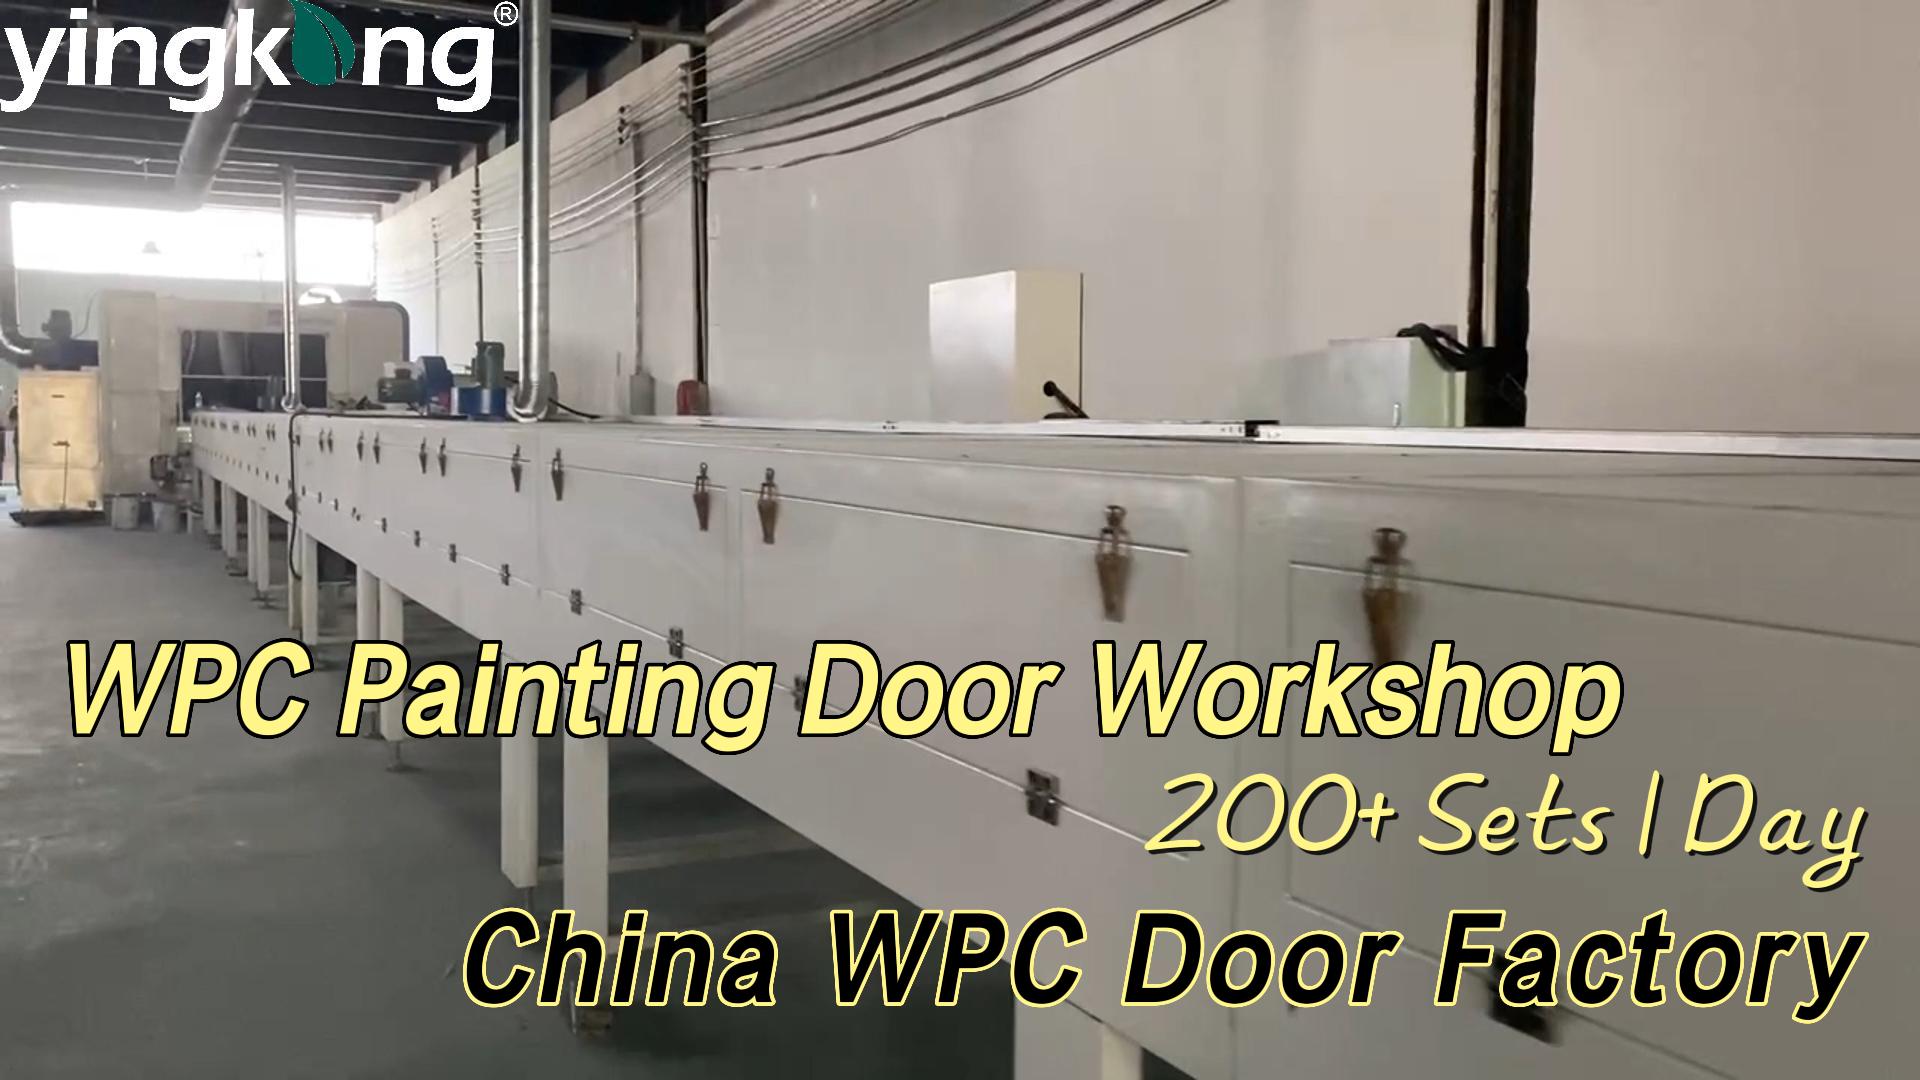 Jiuyixing WPC Doors Adds New WPC Painting Door Machine to Improve the Quality and Output